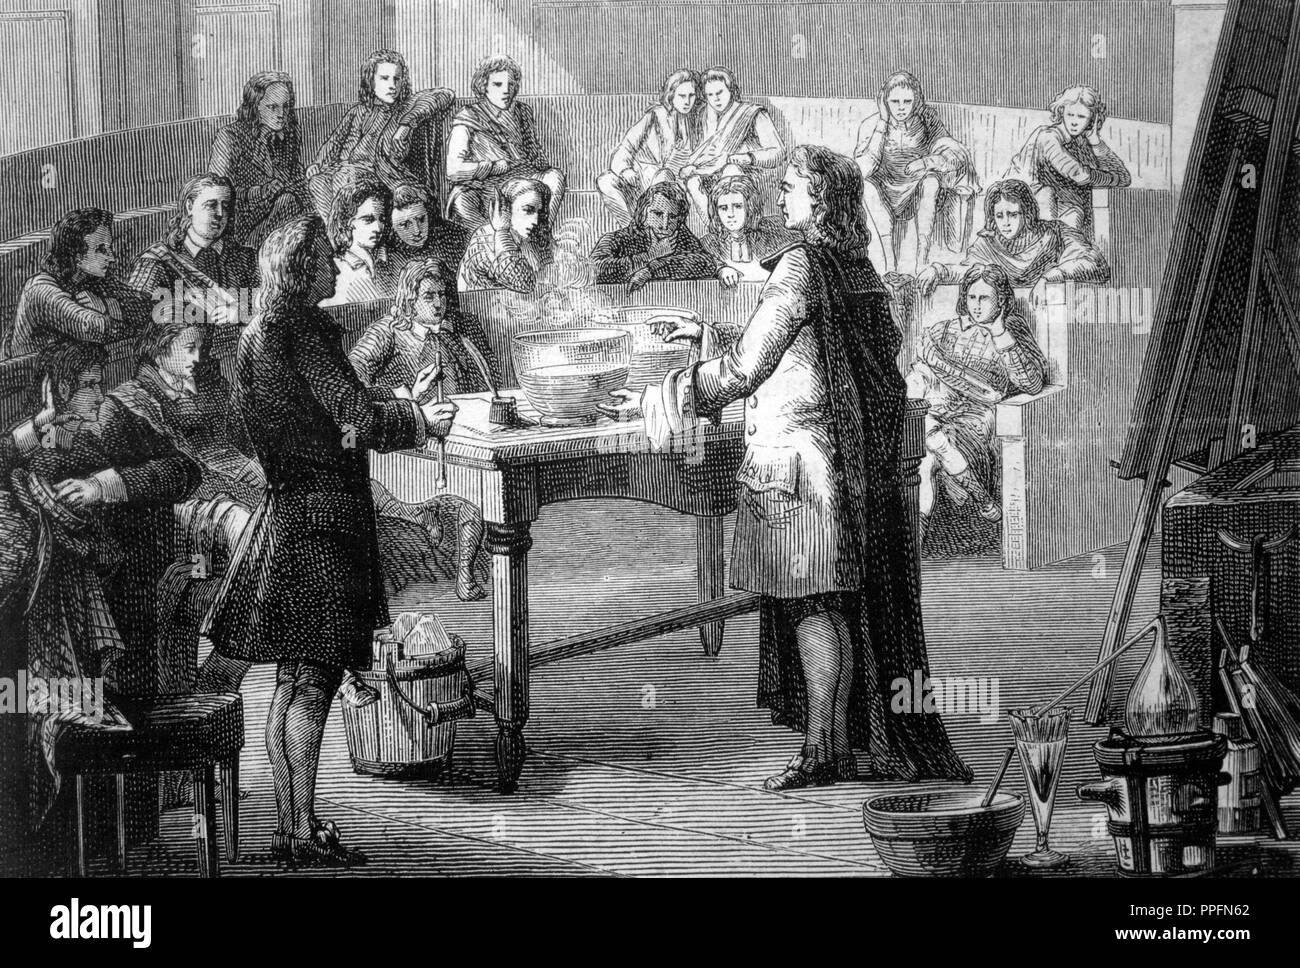 Joseph Black (1728-1799). Scottish Physician, physicist and chemist. Performing experiments on steam at the University of Glasgow. Scotland, 18th century. Stock Photo